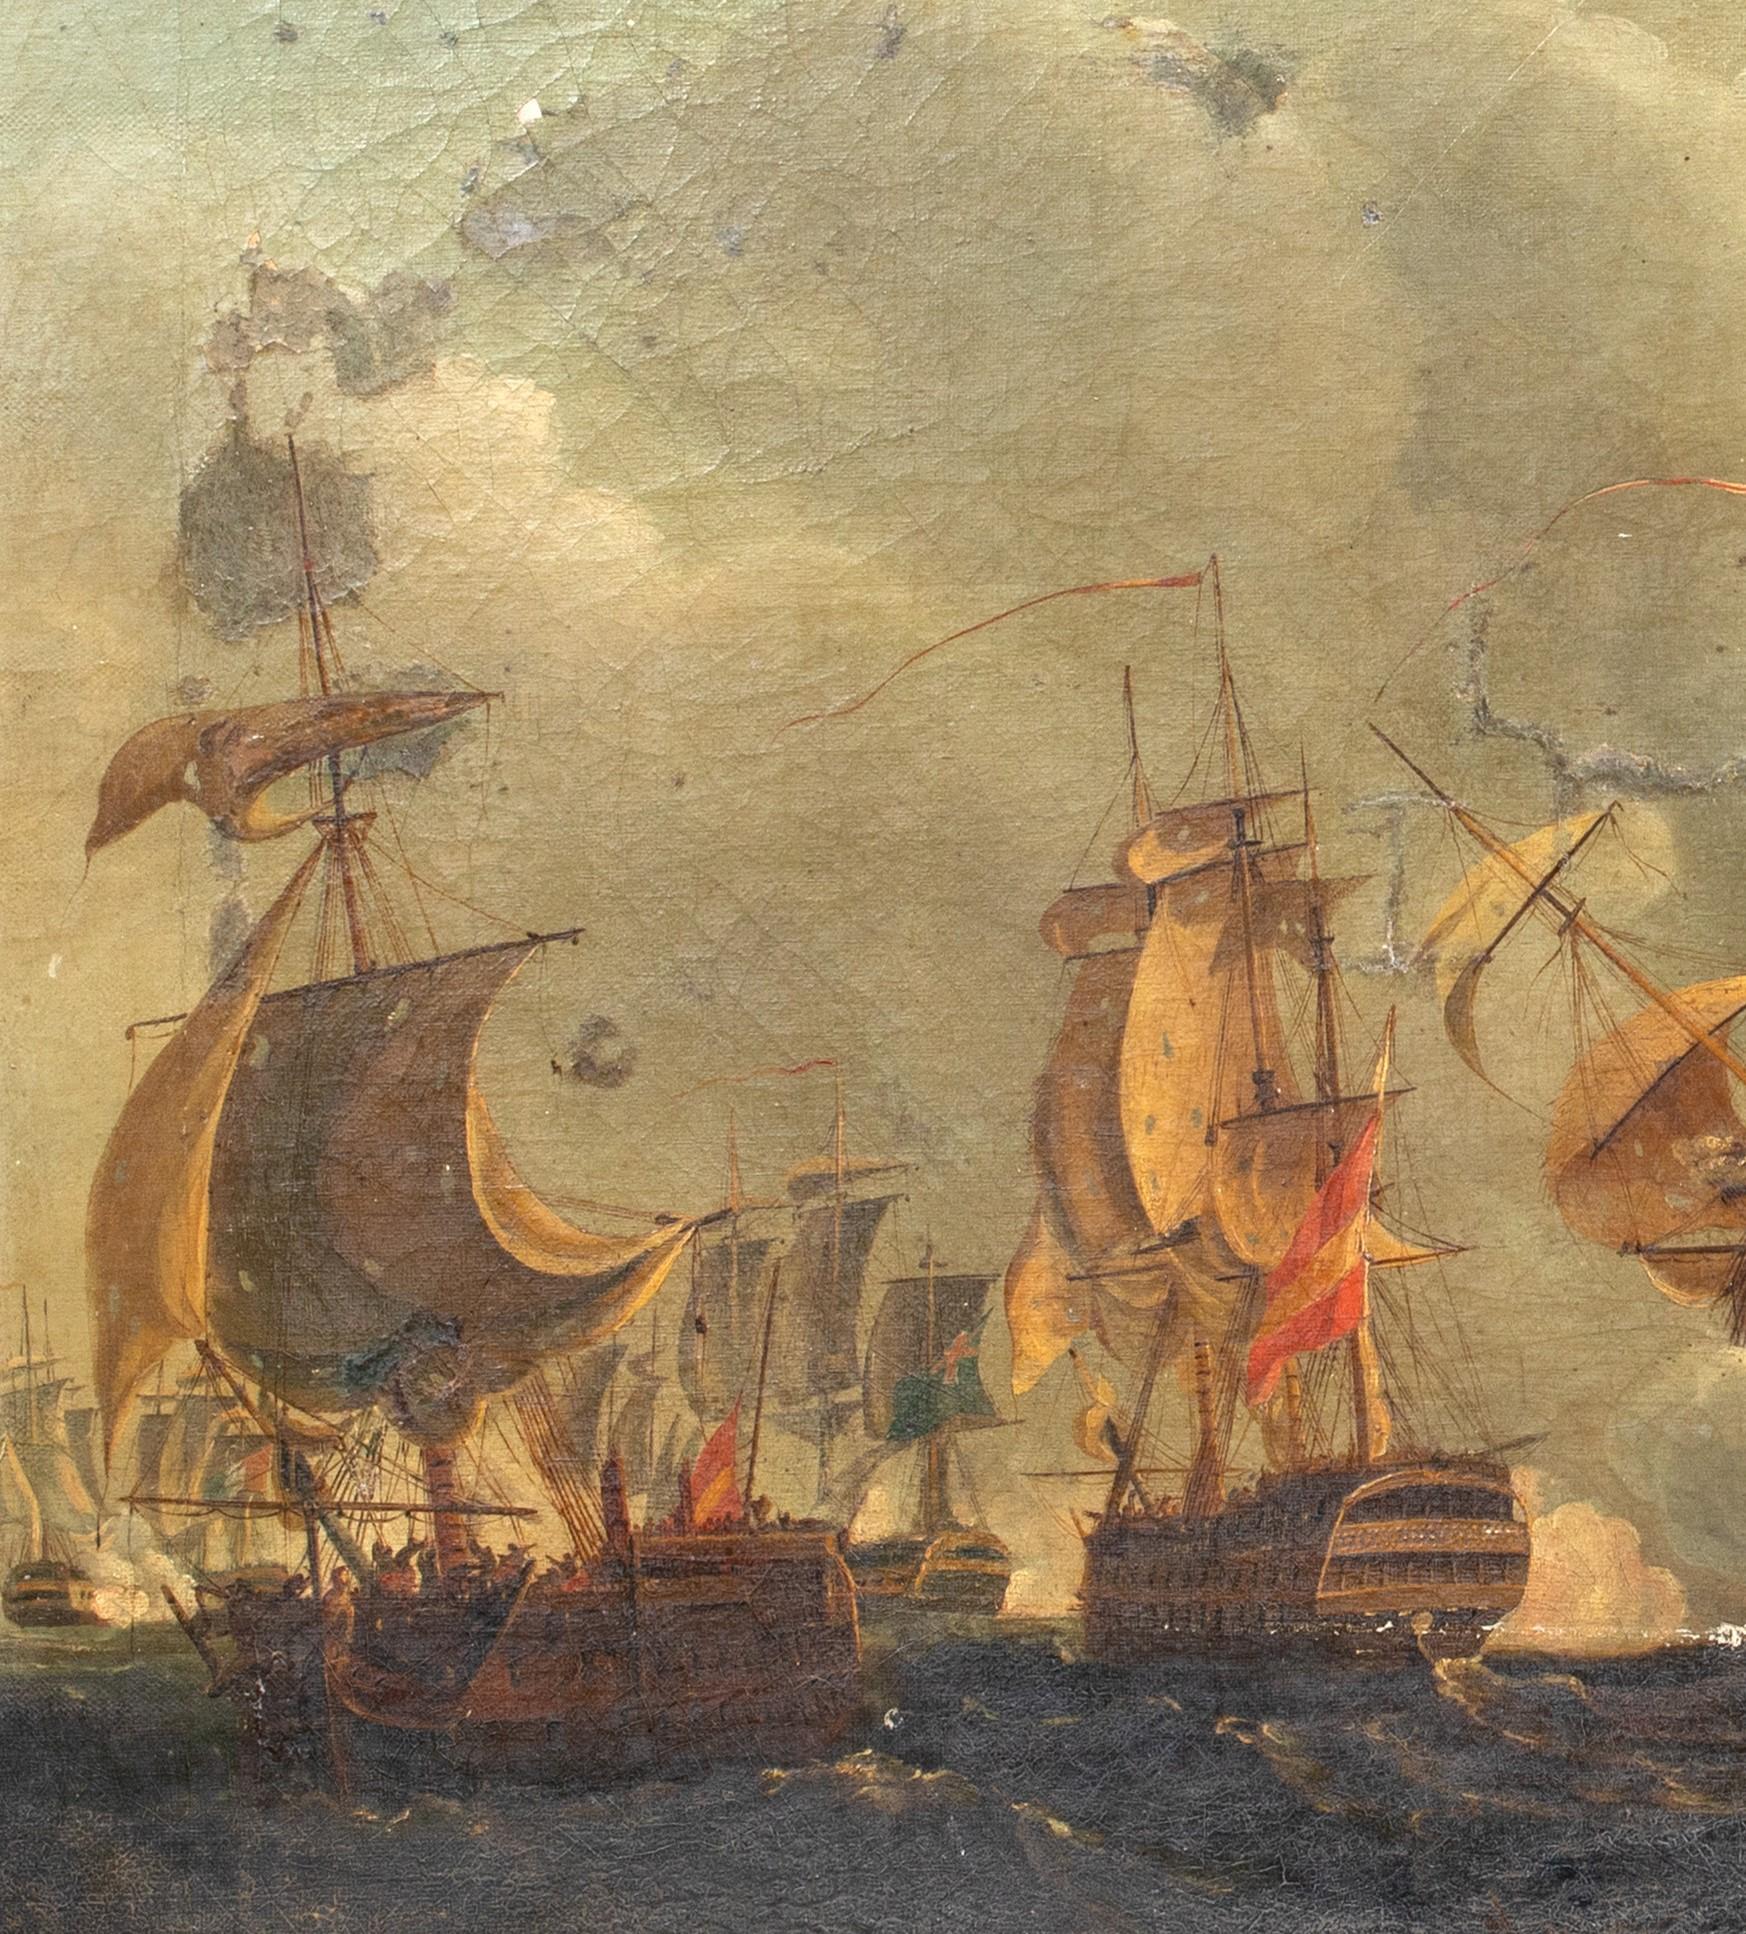 The Battle of Cape St Vincent, Anglo-Spanish War, 1797  - Brown Landscape Painting by Thomas Luny